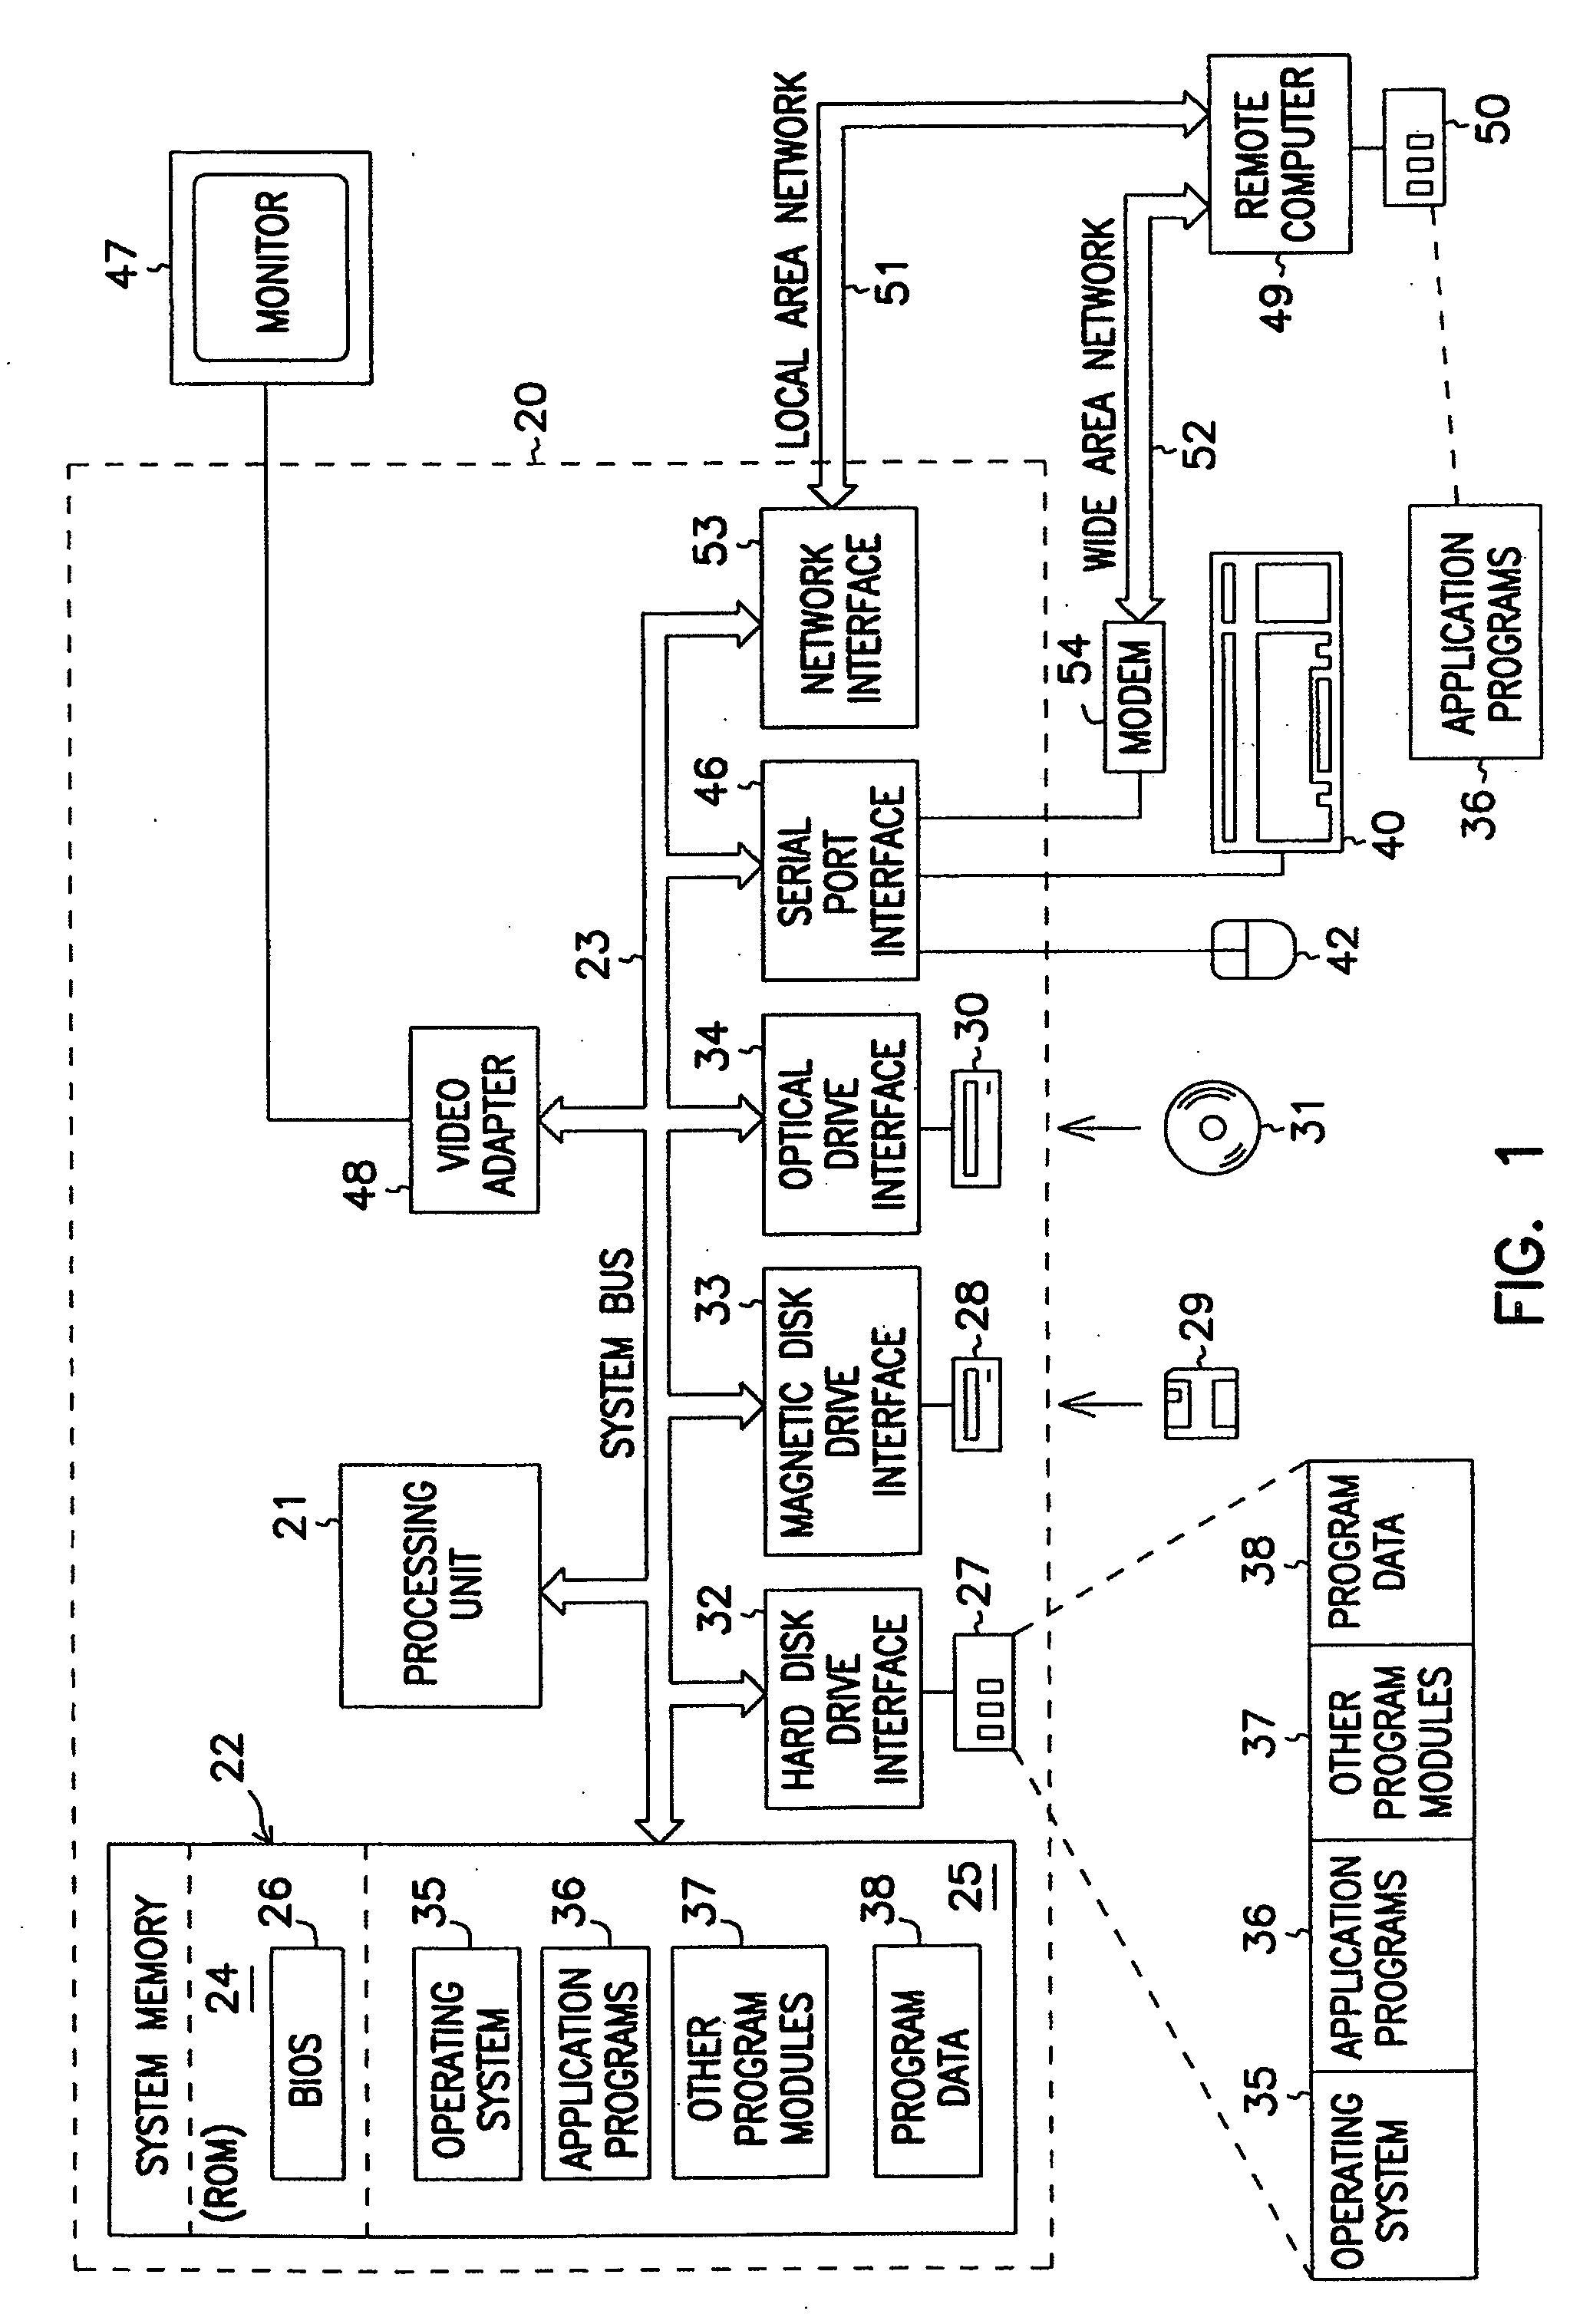 Facility for highlighting documents accessed through search or browsing